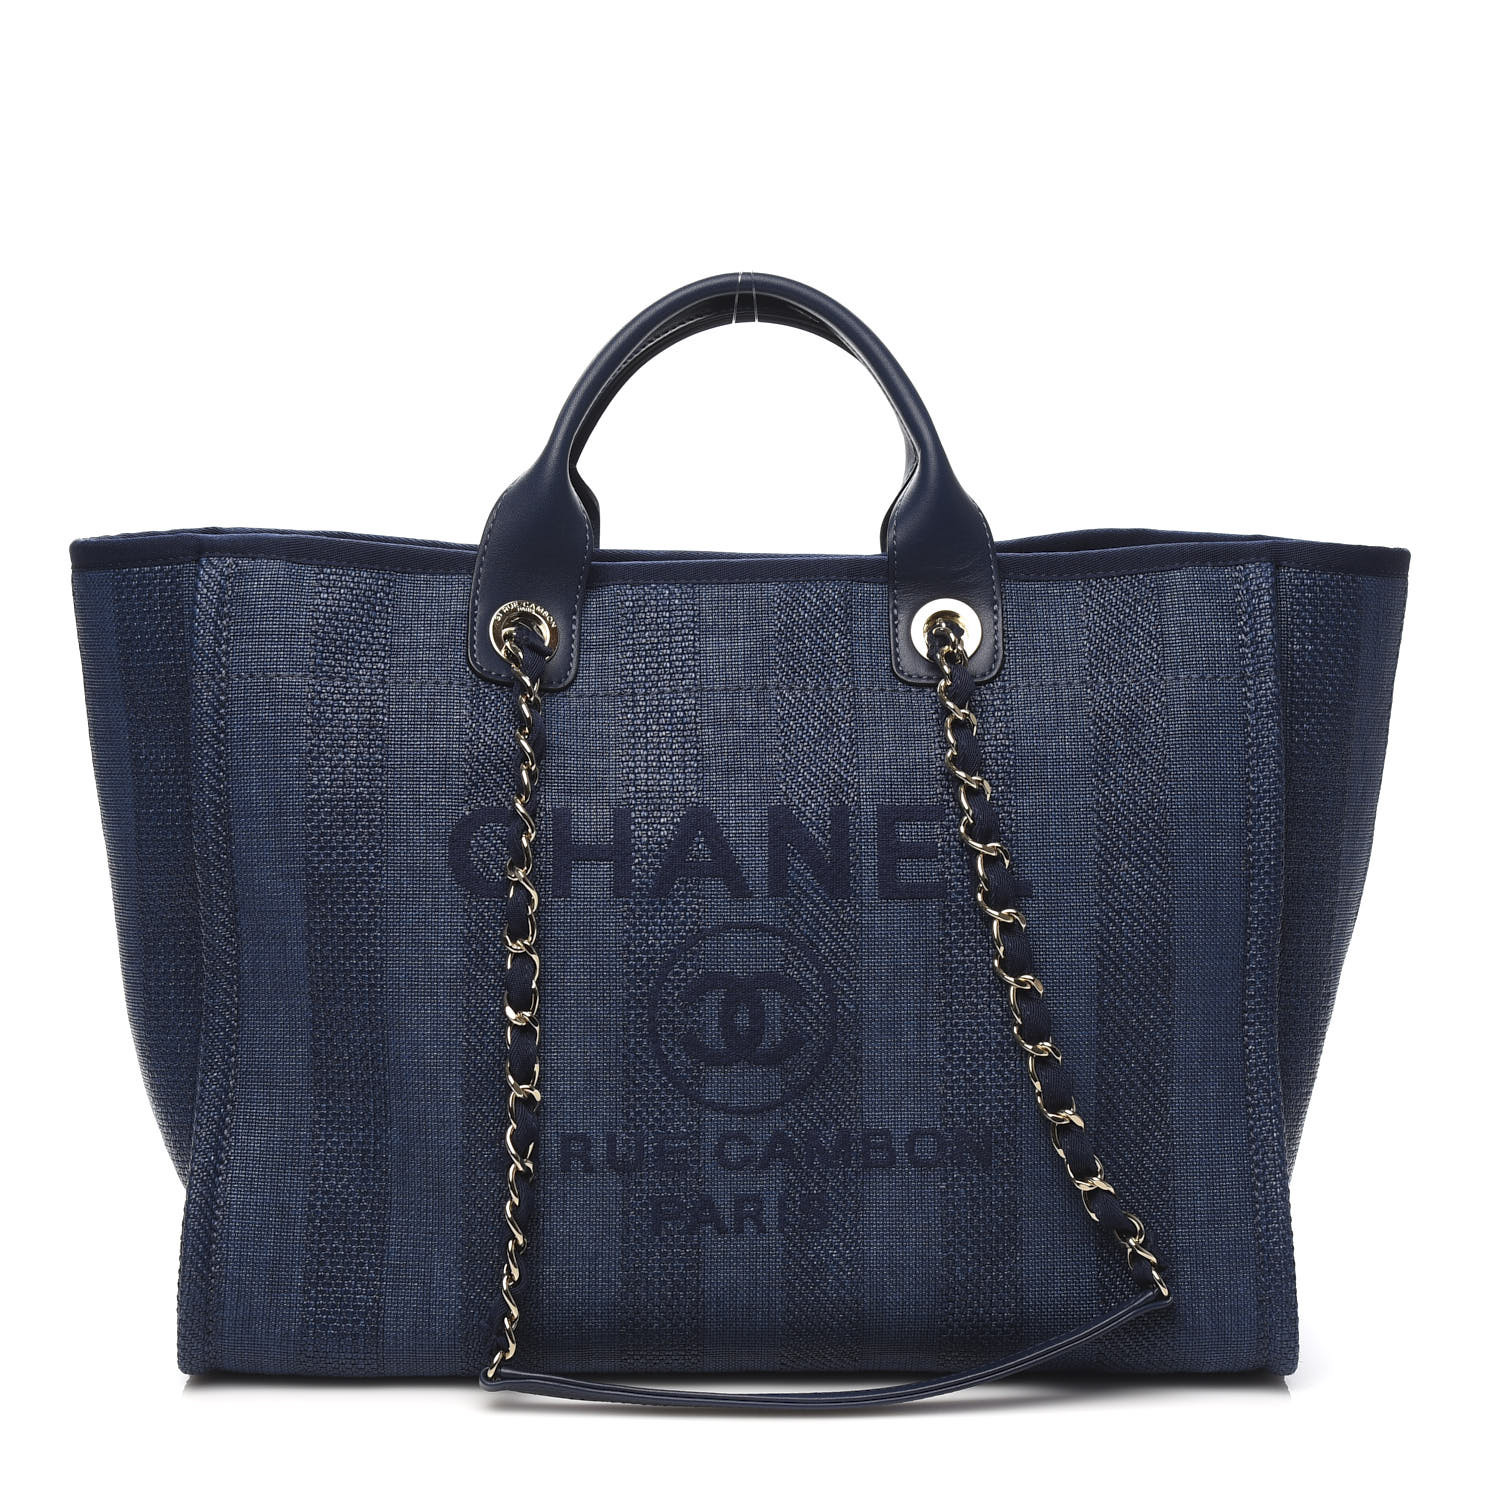 CHANEL Mixed Fibers Striped Medium Deauville Tote Navy Blue 642814 ...